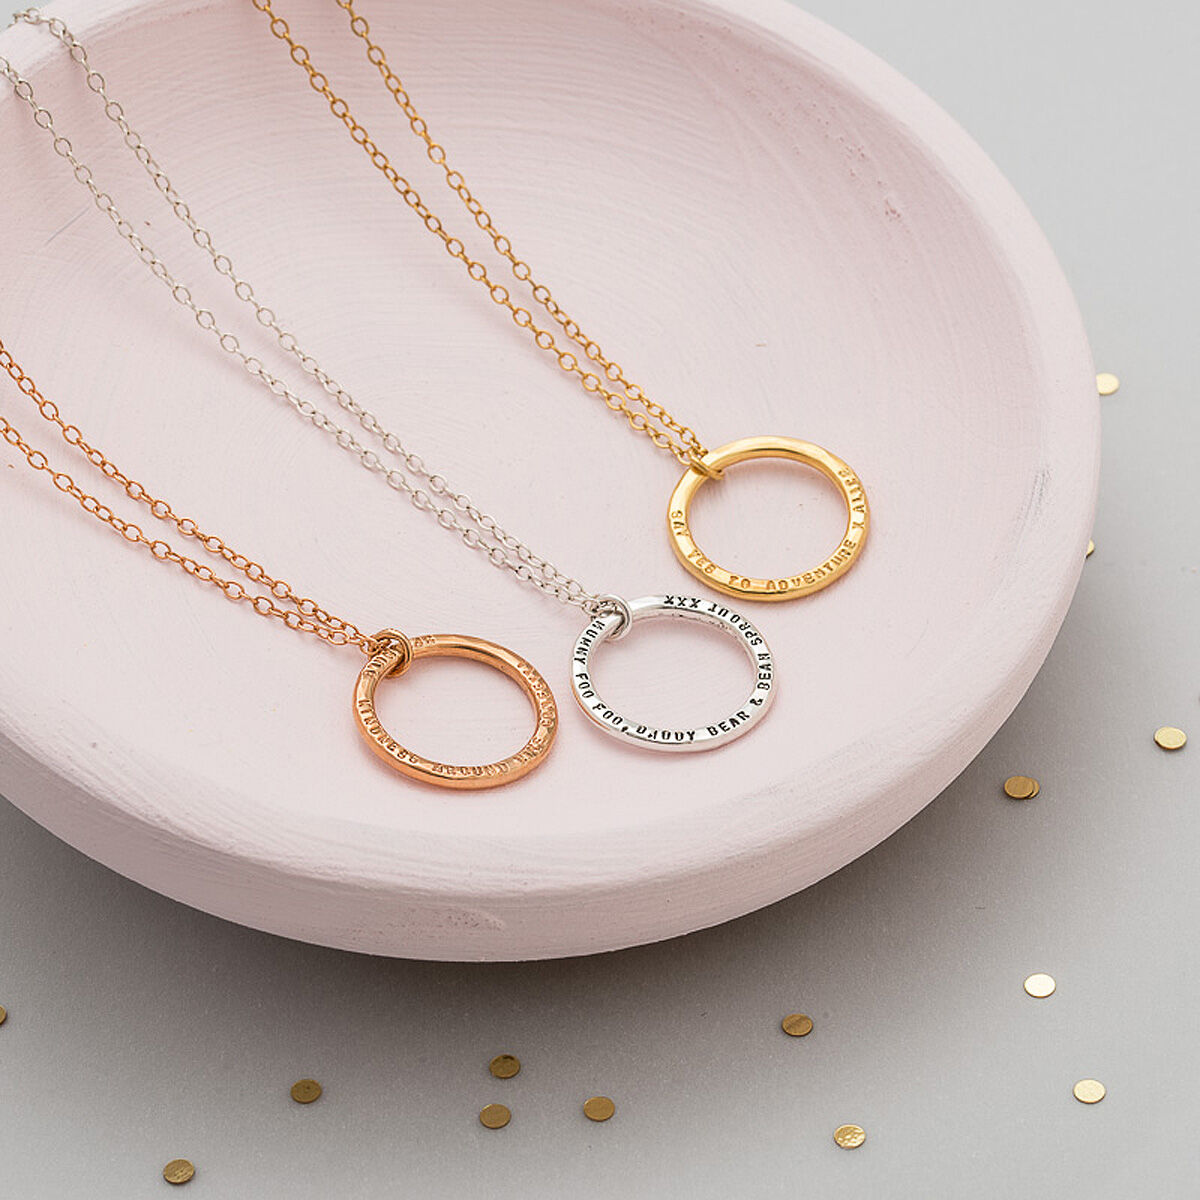 Personalised Mini Ring Necklace | Gifts for Her | Treat Republic